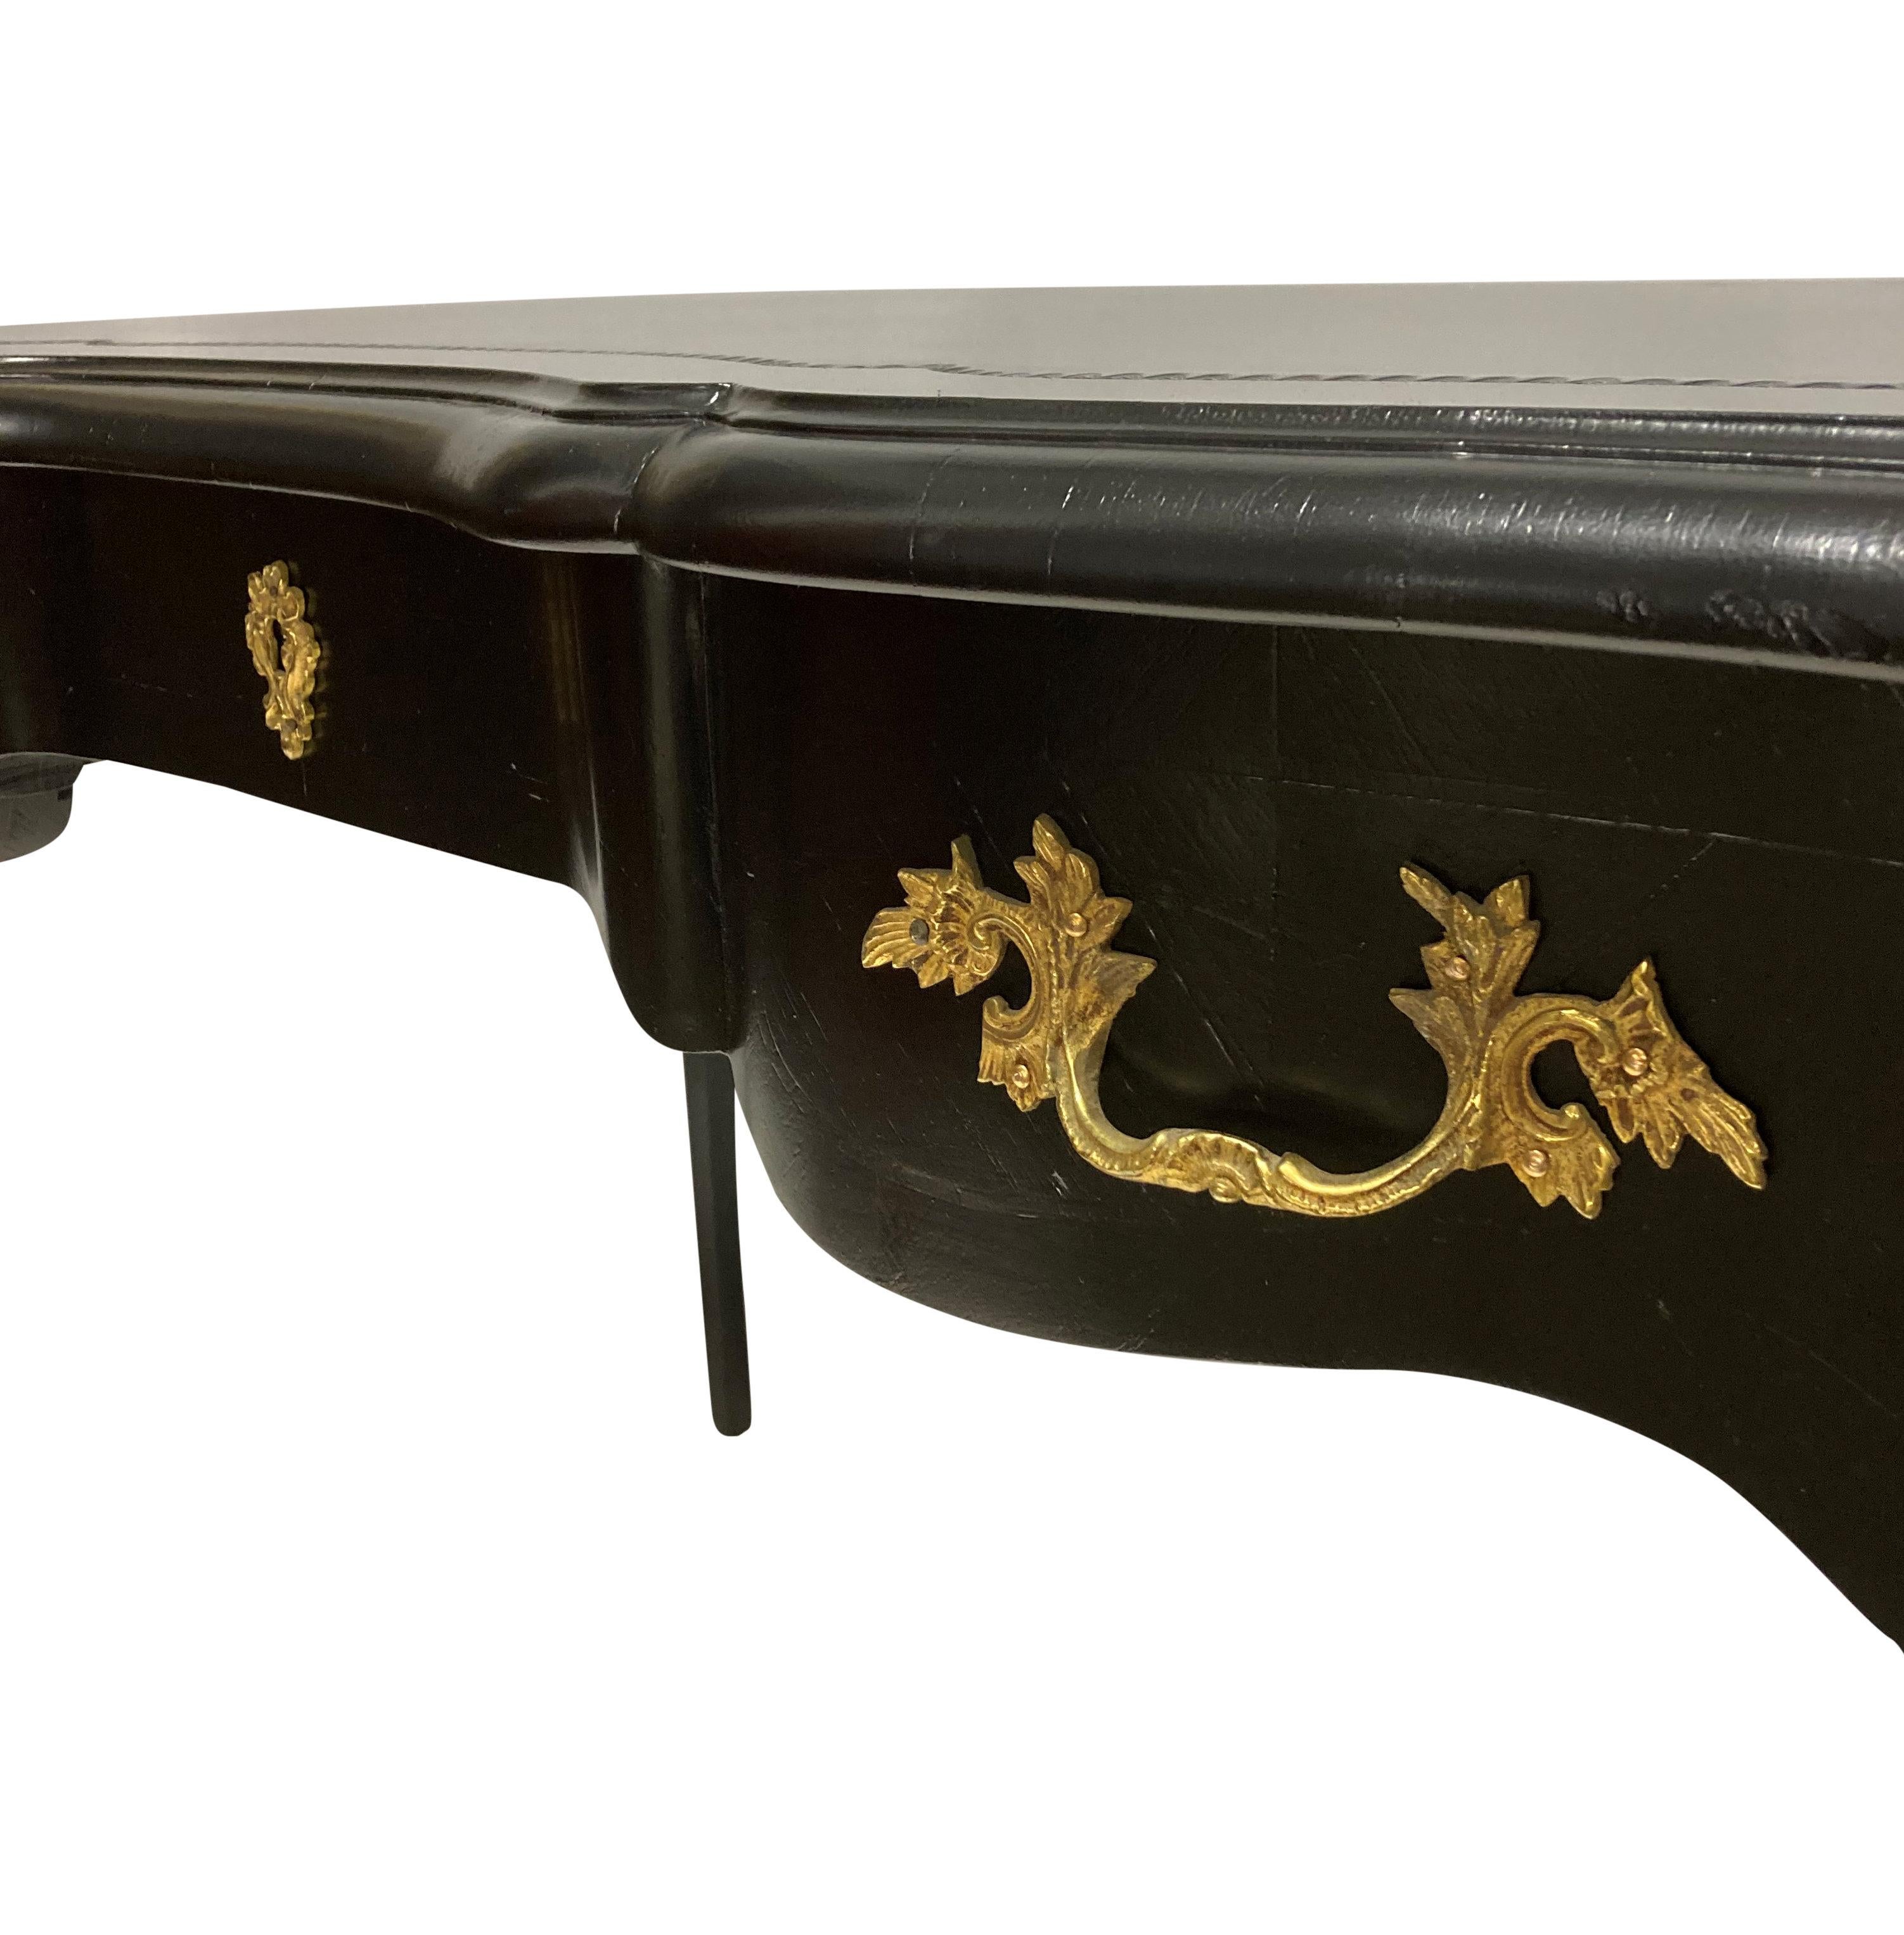 A French Louis XV style black lacquered writing table or bureau plat. With three working drawers, including original key and blind drawers at the front. Fitted throughout with fine gilt bronze mounts and with a shaped black leather top with blind